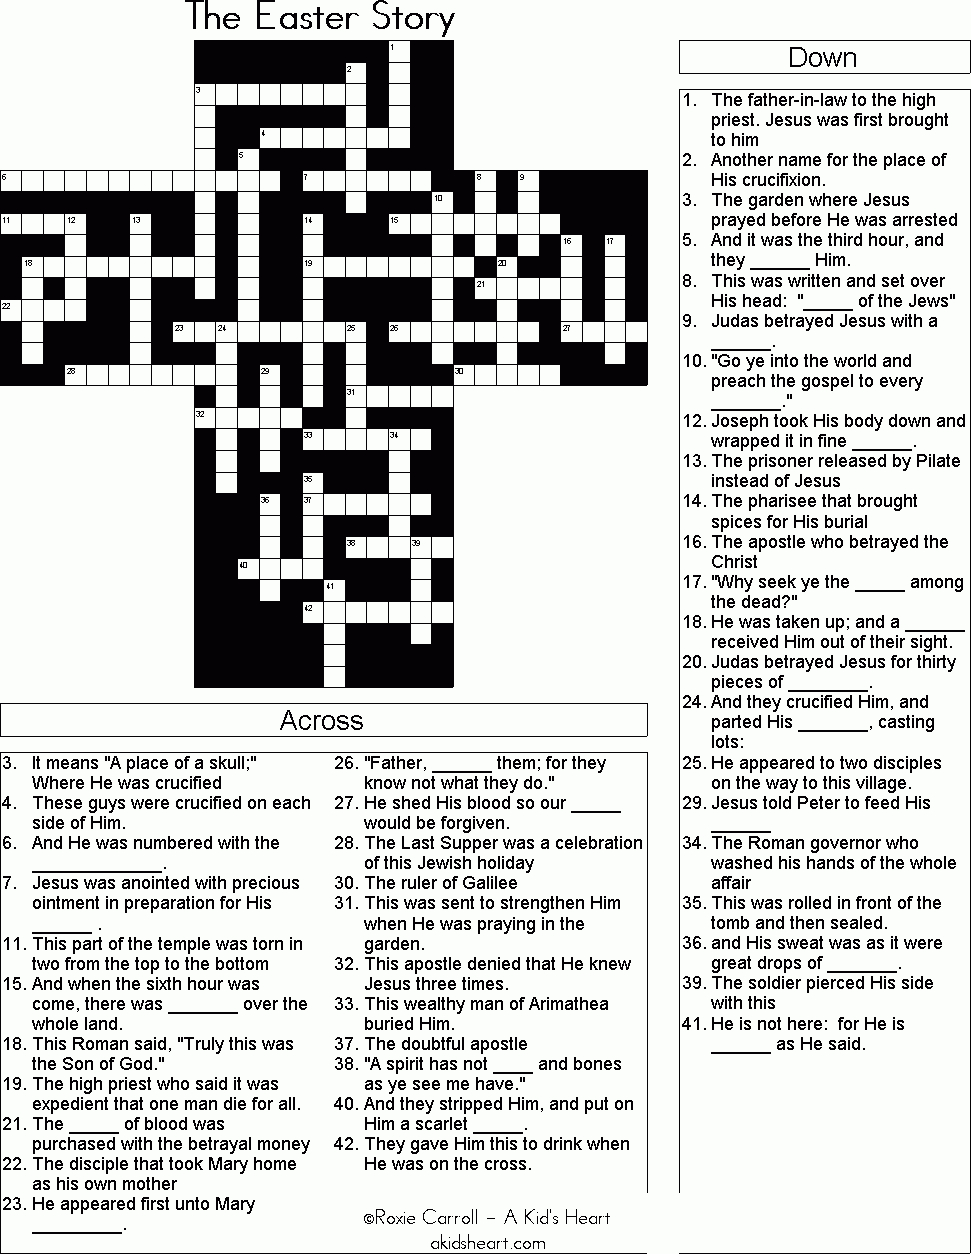 The Easter Story Crossword Puzzle | Bible Crosswords/word Search - Printable Bible Crossword Puzzles With Answers